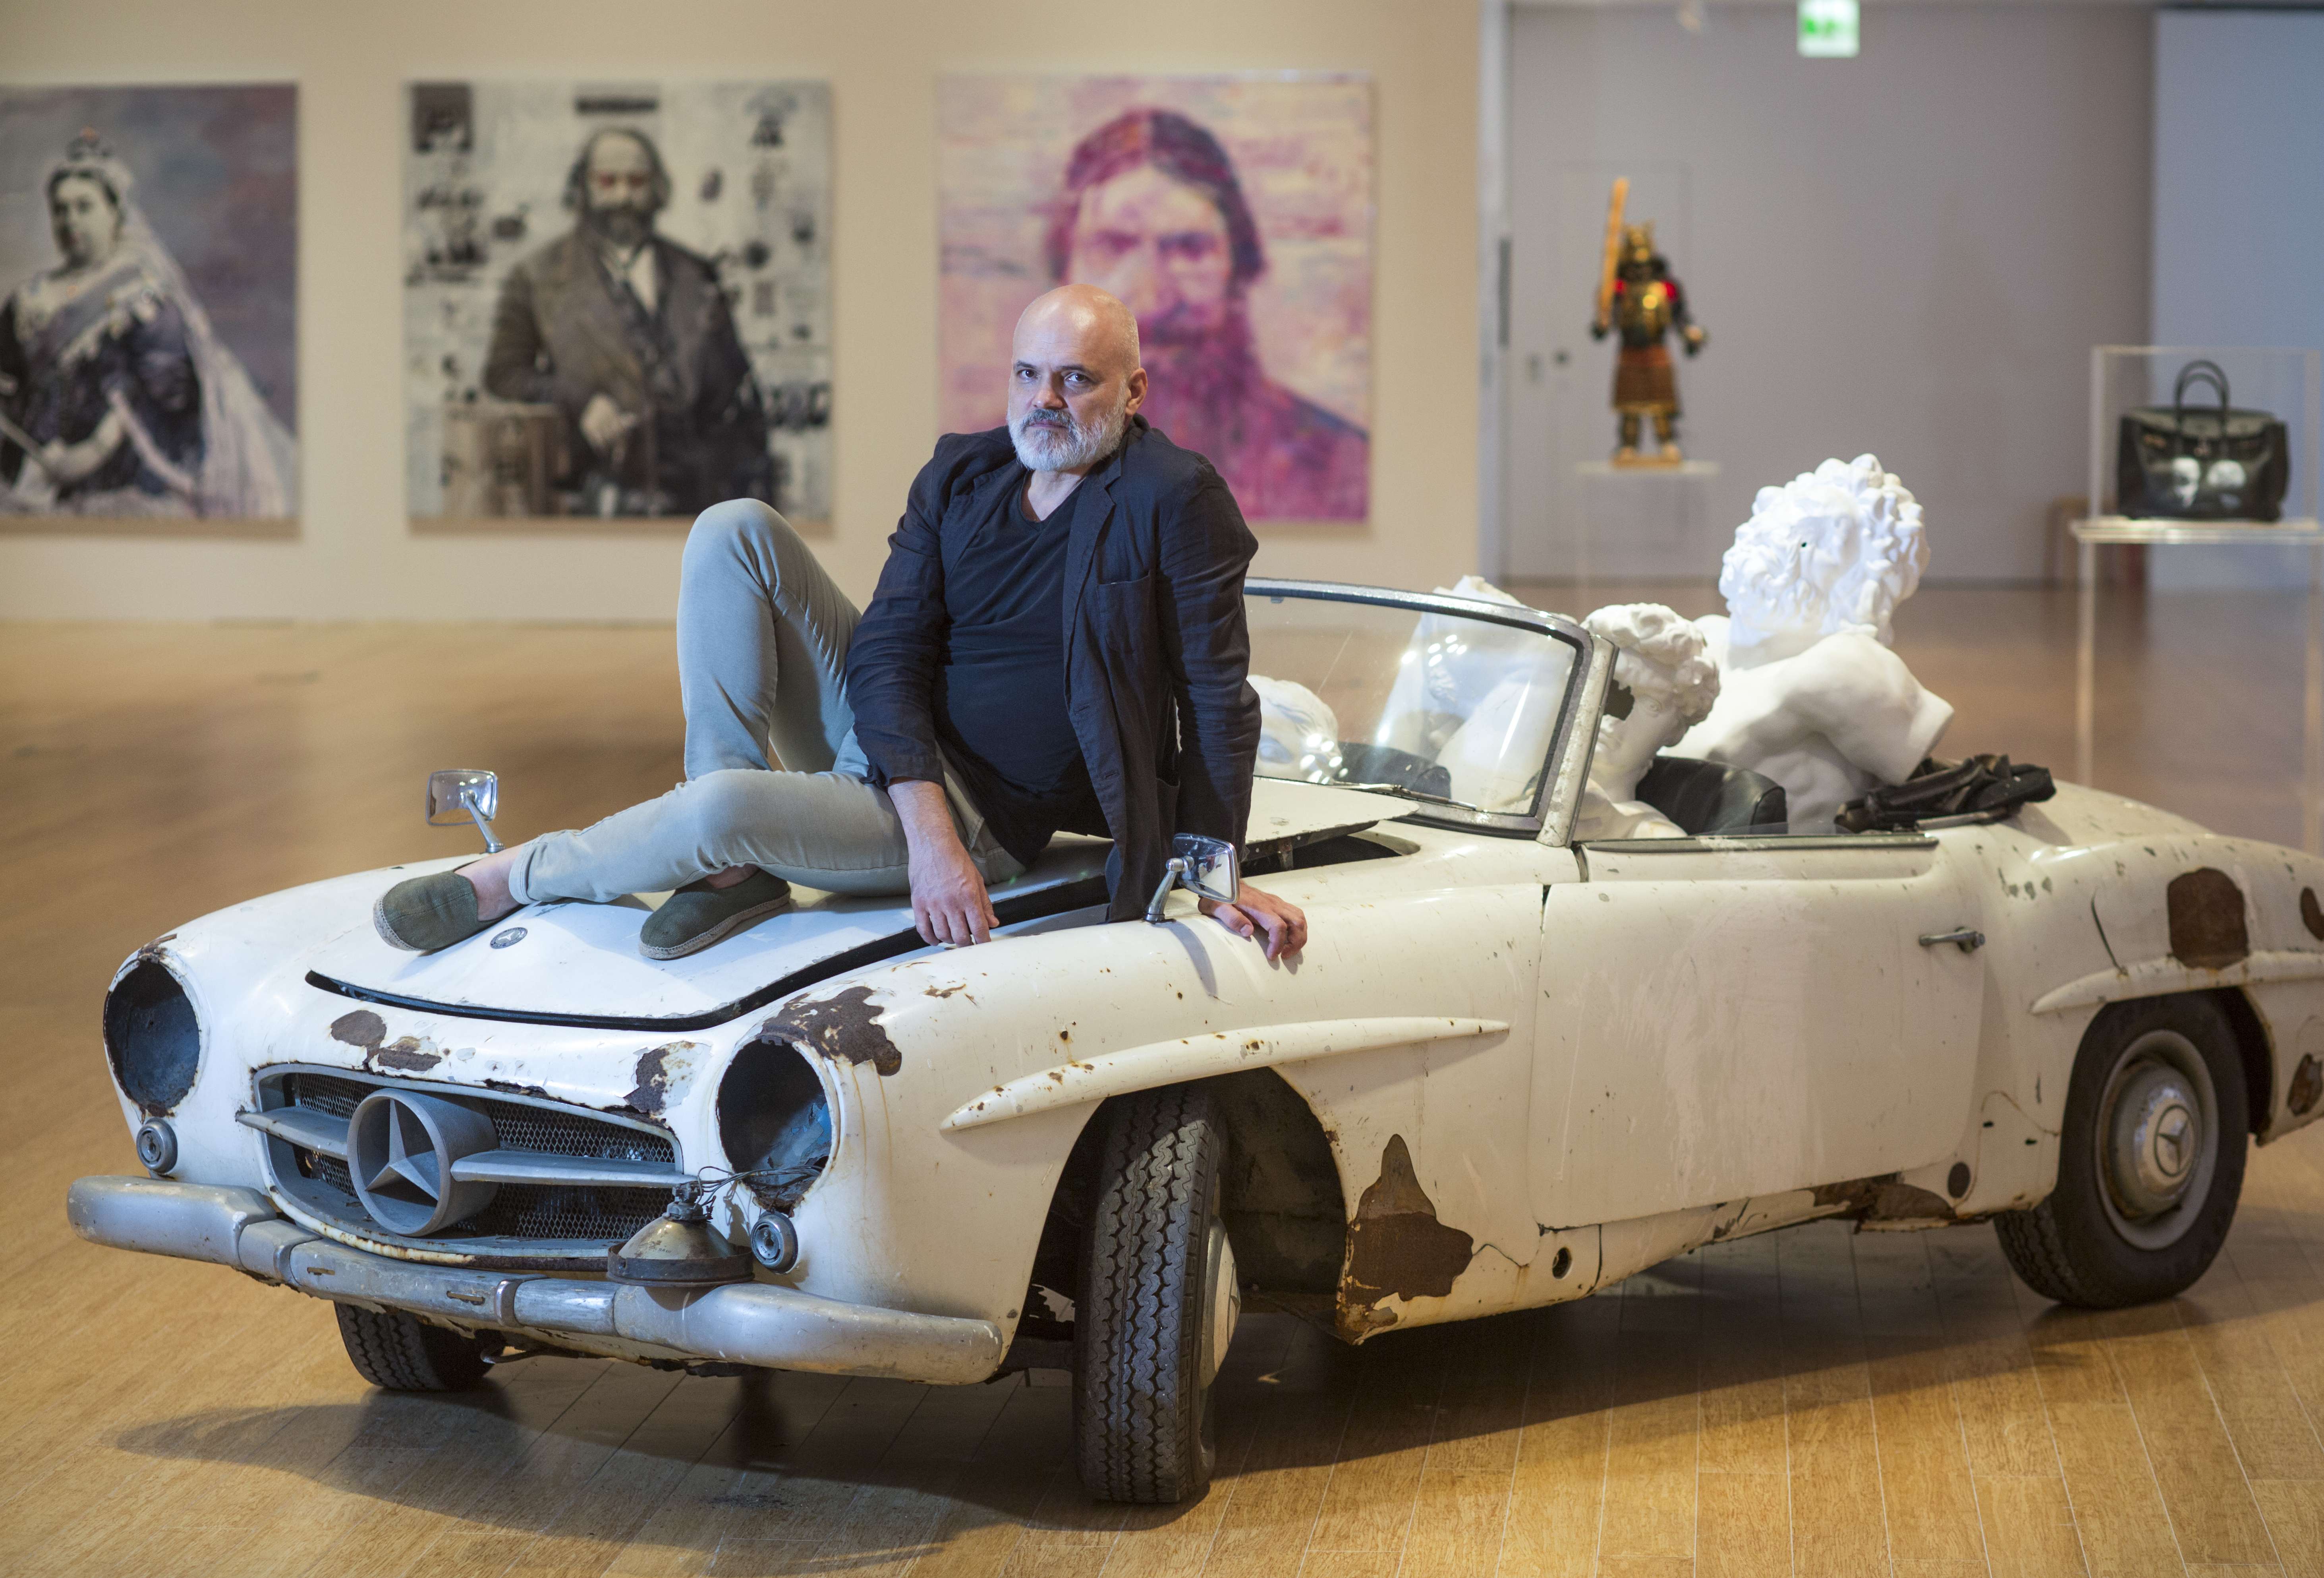 Russian artist Konstantin Bessmertny with Ride (2016), part of his “Ad Lib” exhibition of recent works on display at the Macau Museum of Art. Pictures: May Tse